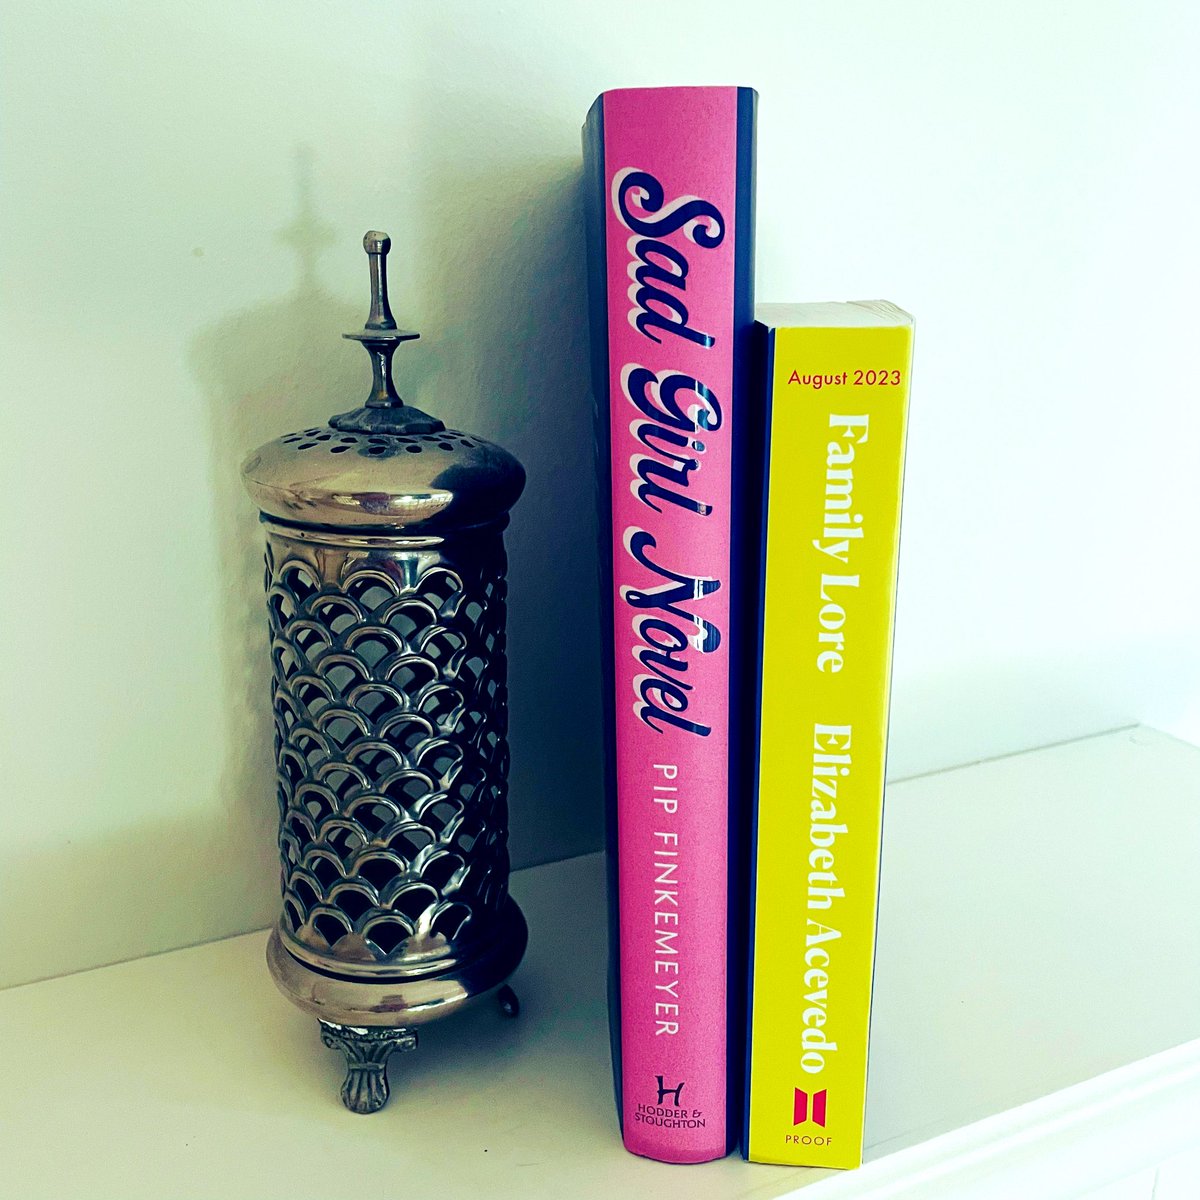 Happy Thursday and happy publication day to these two crackers - #SadGirlNovel by Pip Finkemeyer and #FamilyLore by @acevedowrites